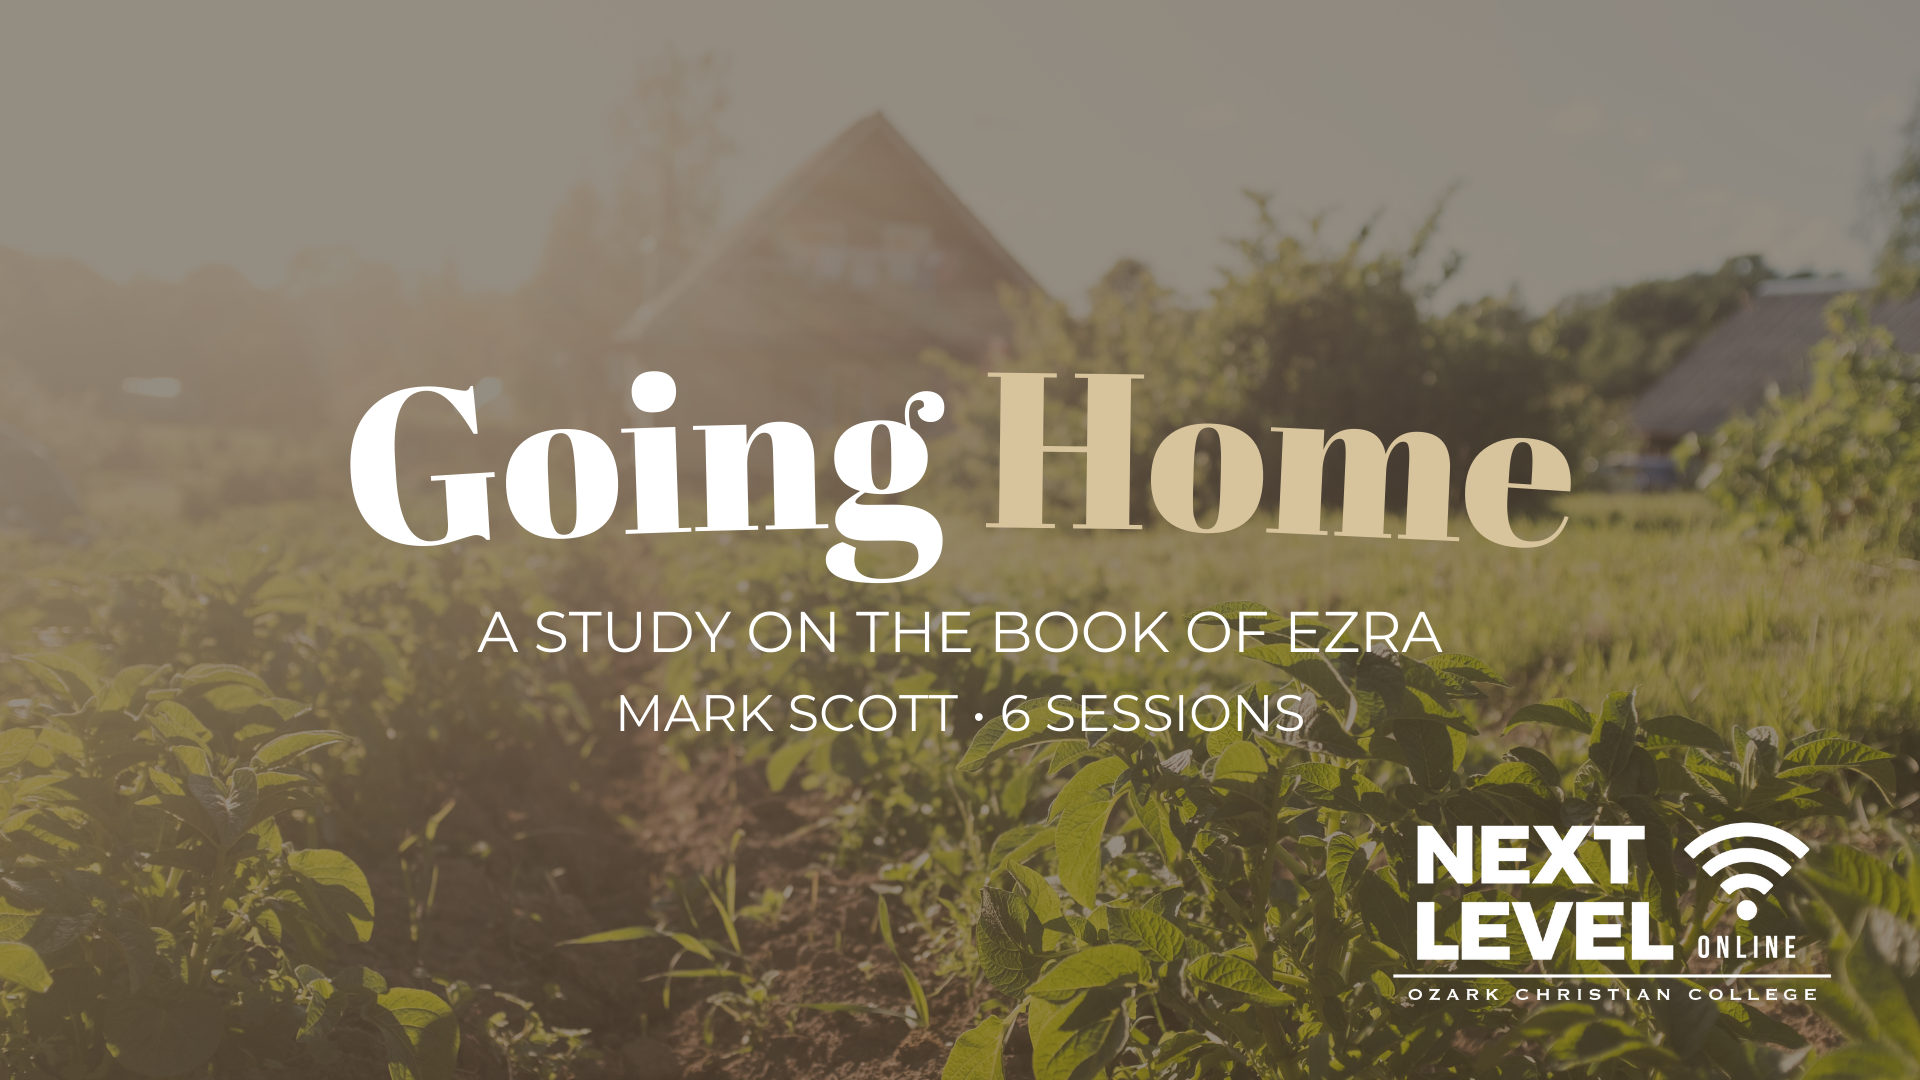 Going Home: A Study on the Book of Ezra